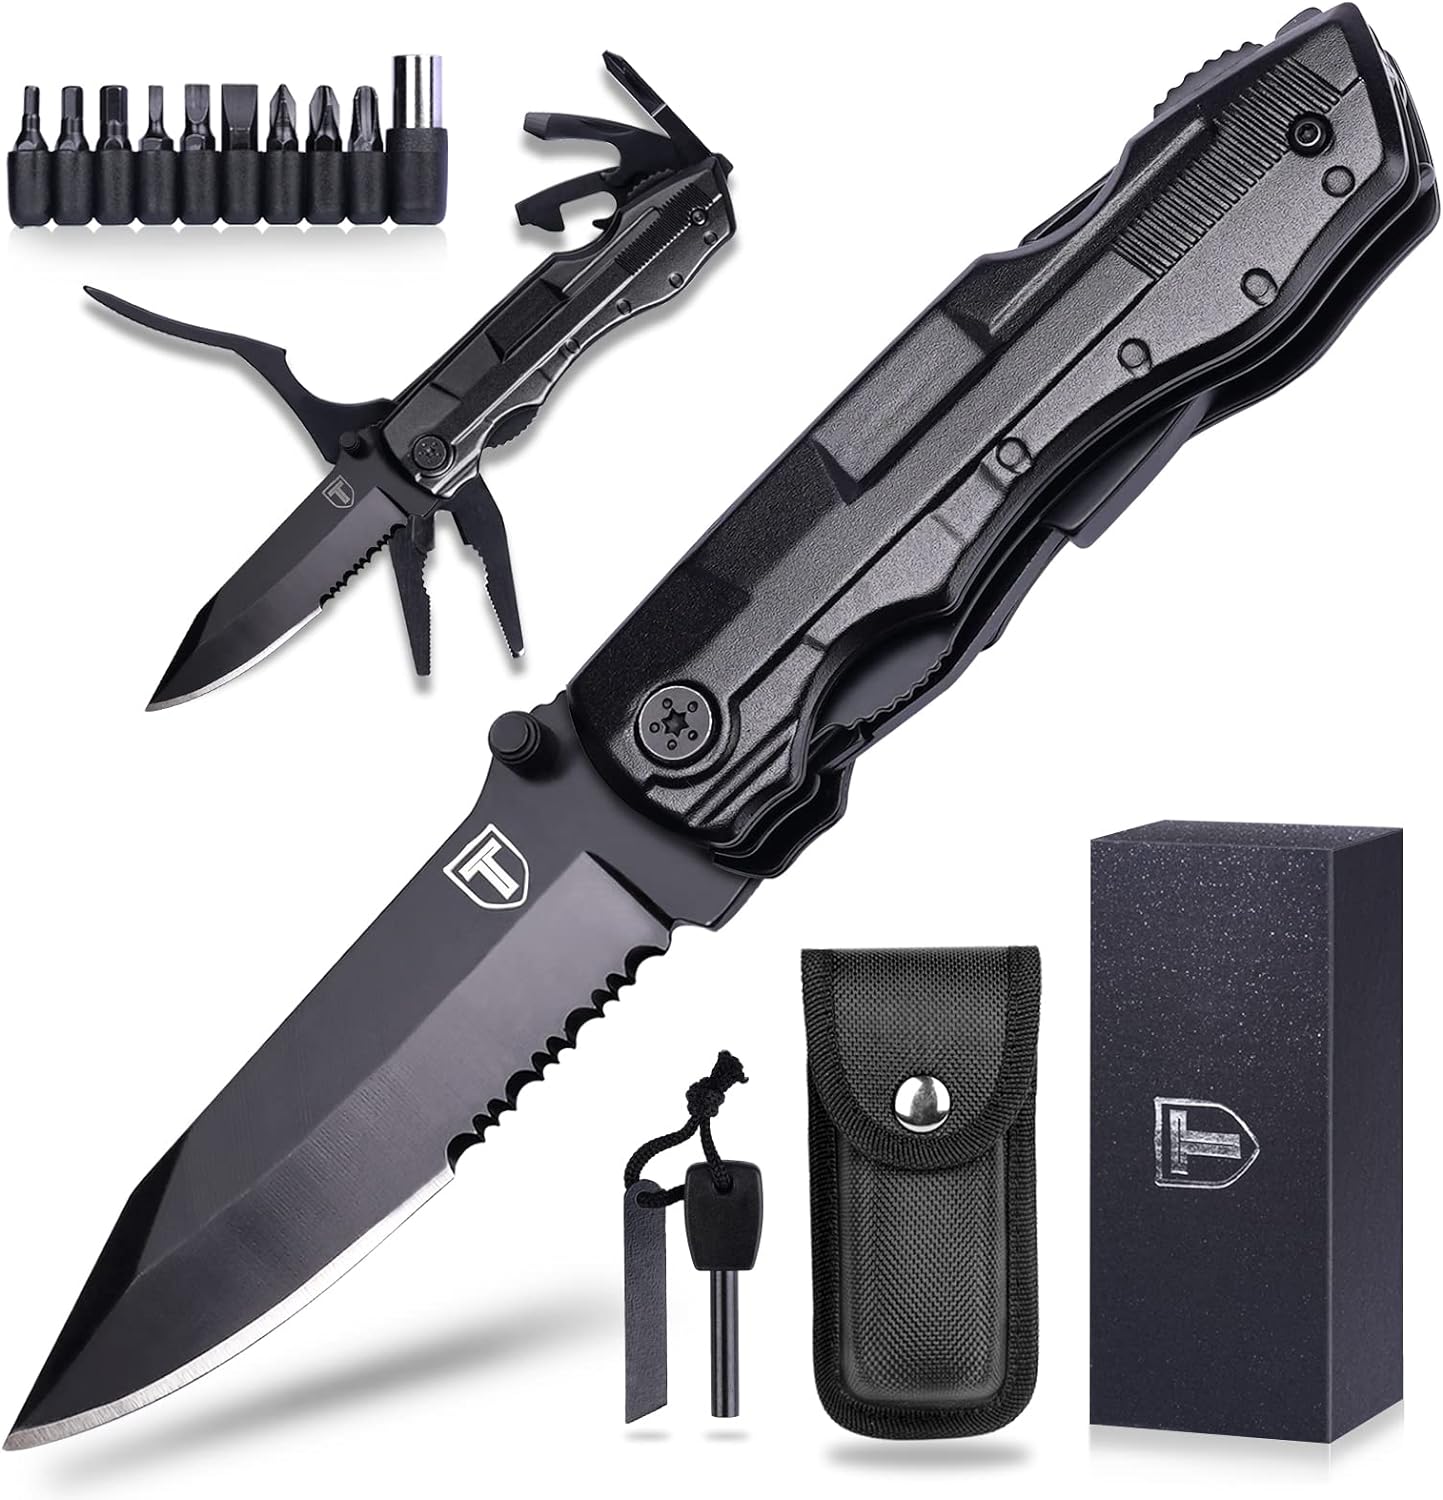 TRSCIND Pocket Knife Multitool, Christmas Stocking Stuffers Unique Camping  Hunting Fishing Birthday Gift Ideas for Men Dad Husband Him